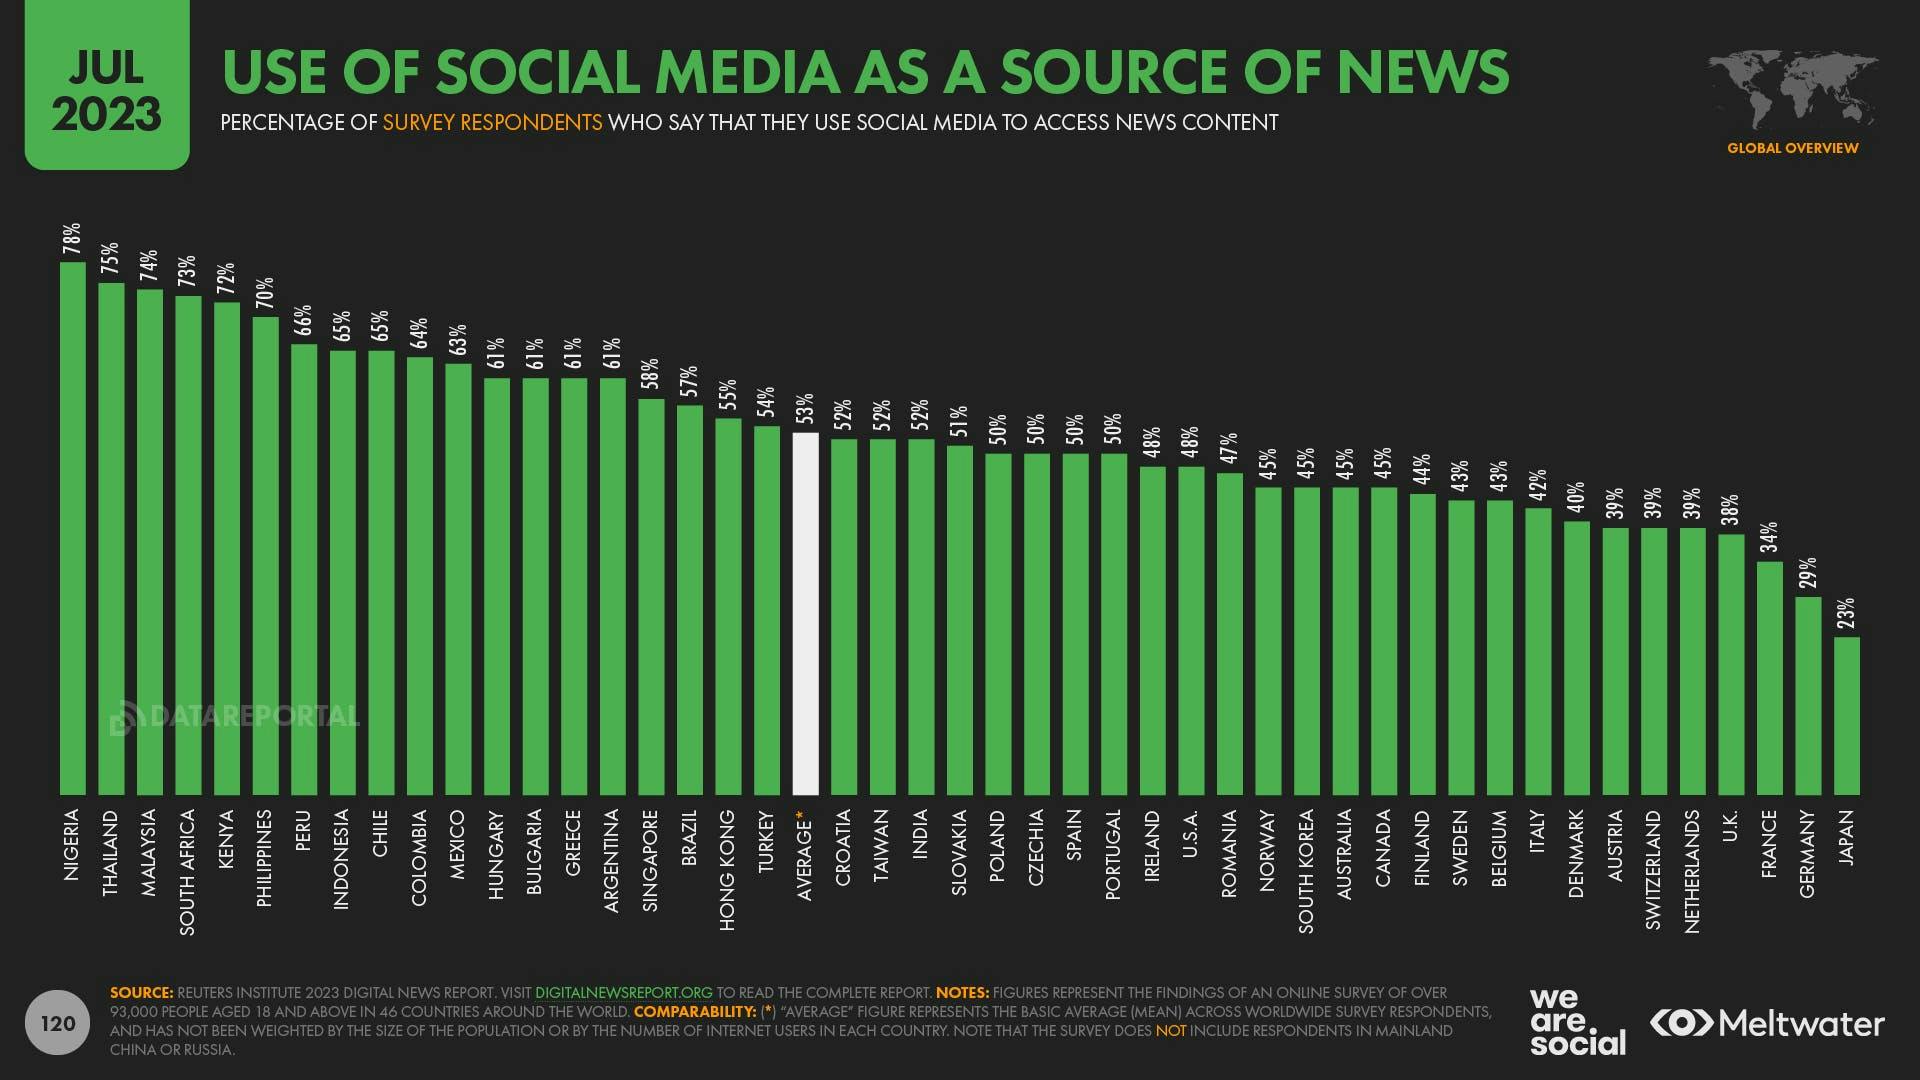 A bar chart showing use of social media as a source of news across nations with a global average of 53%, according to RISJ survey data.